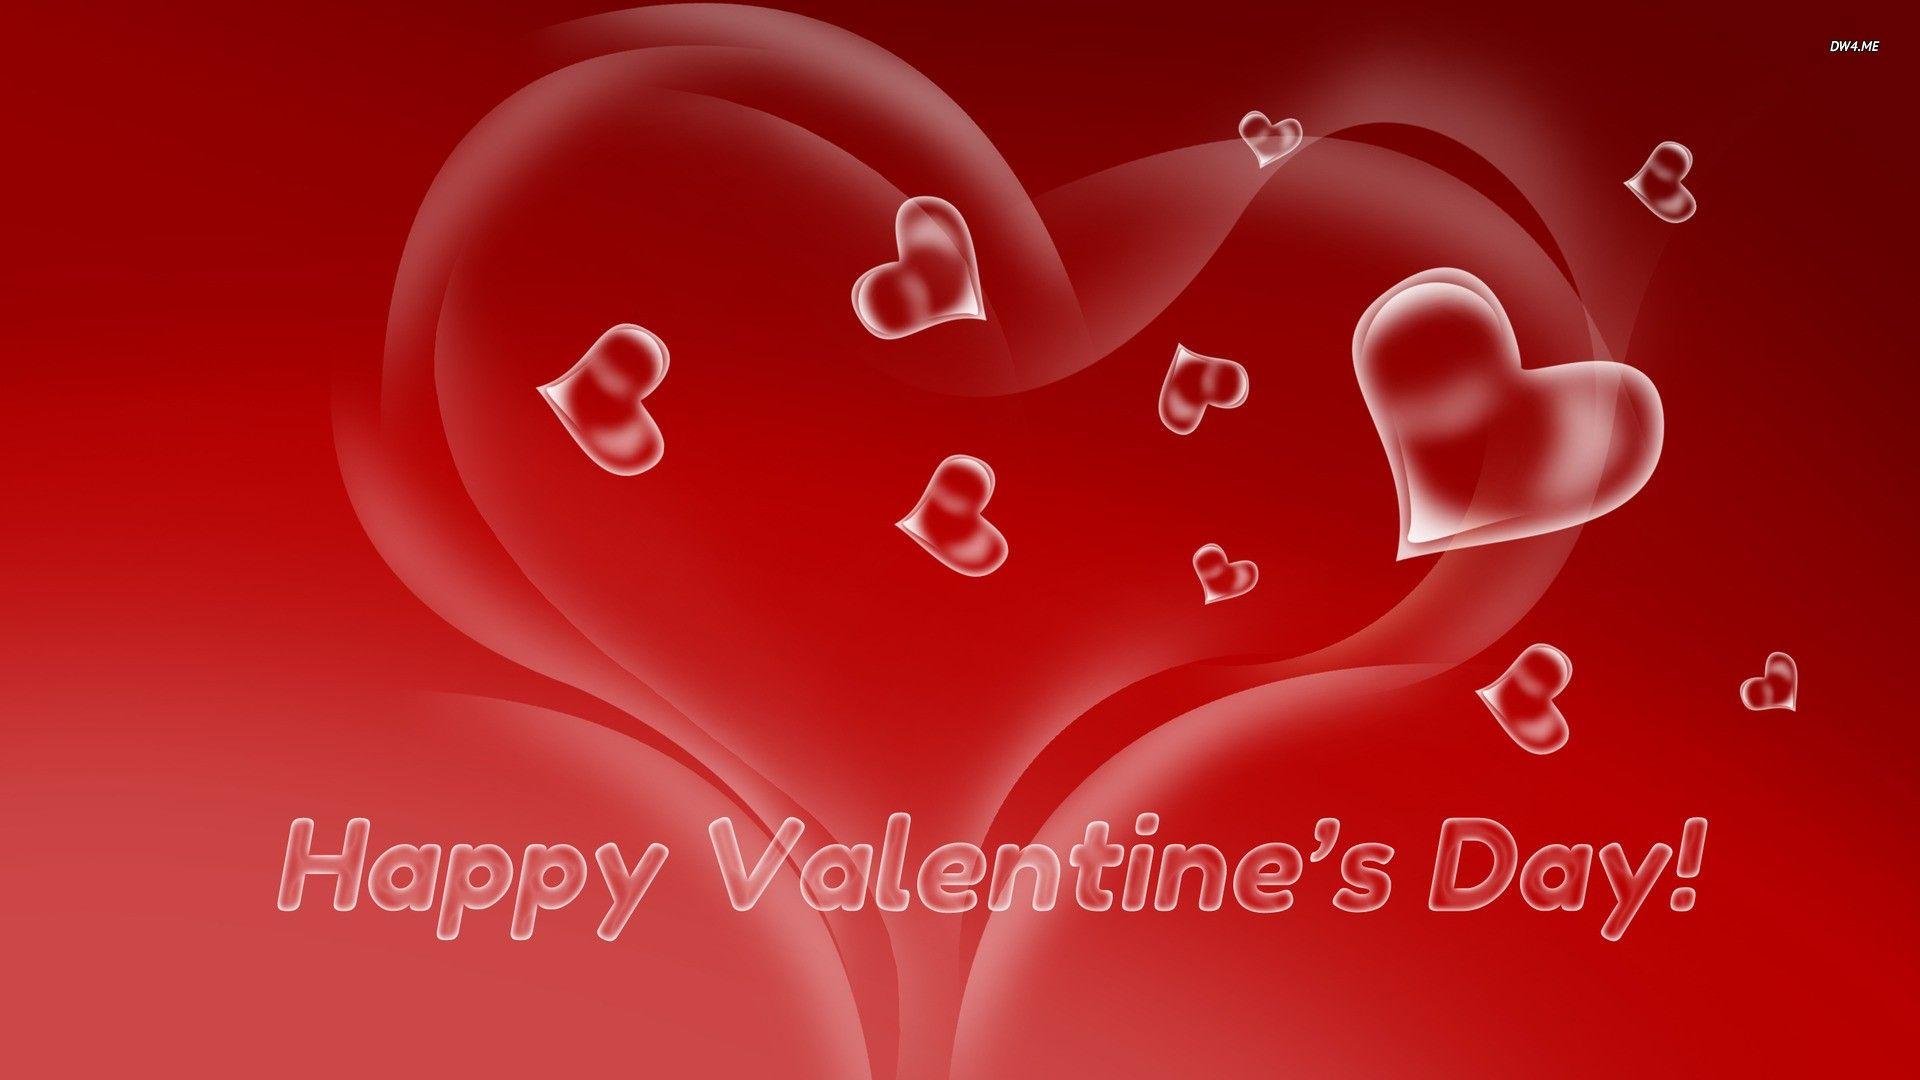 VALENTINES DAY WALLPAPER. Valentines day picture, Creative